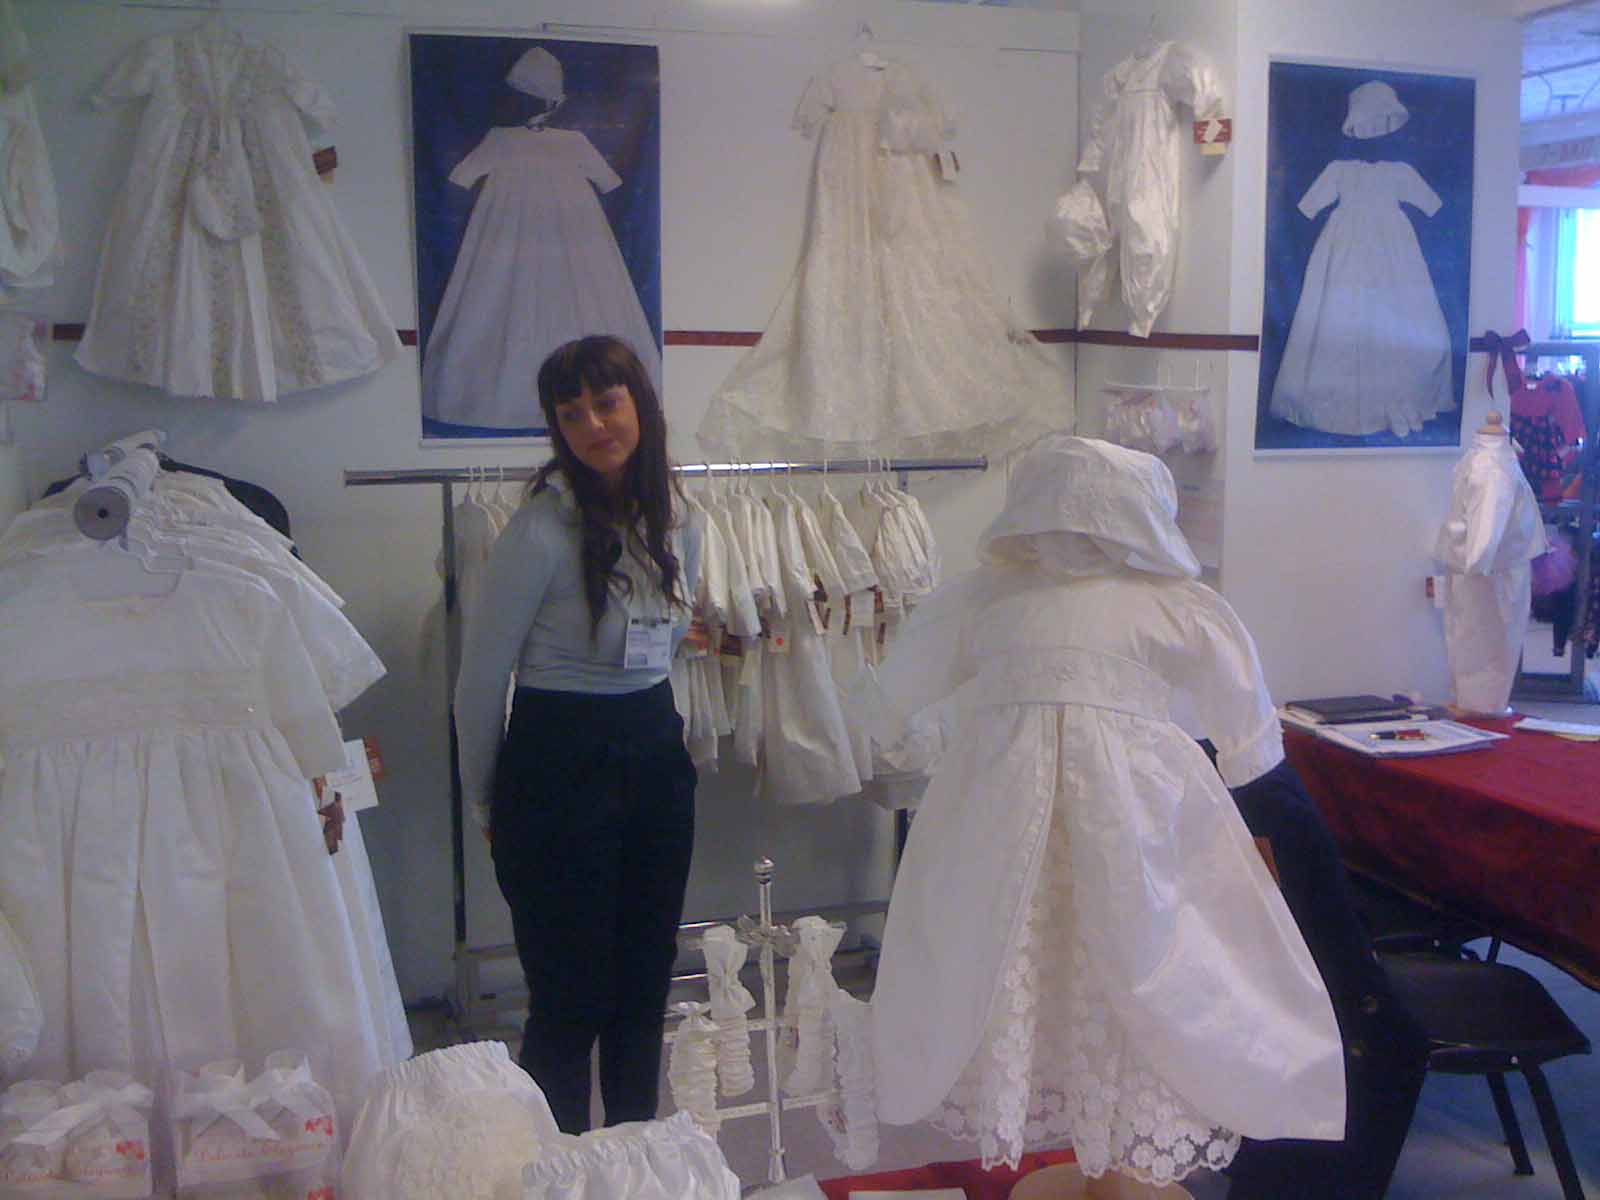 Delicate Elegance exhibiting at StyleMax Childrenswear, Merchandise Mart trade show in Chicago, USA in March 2010